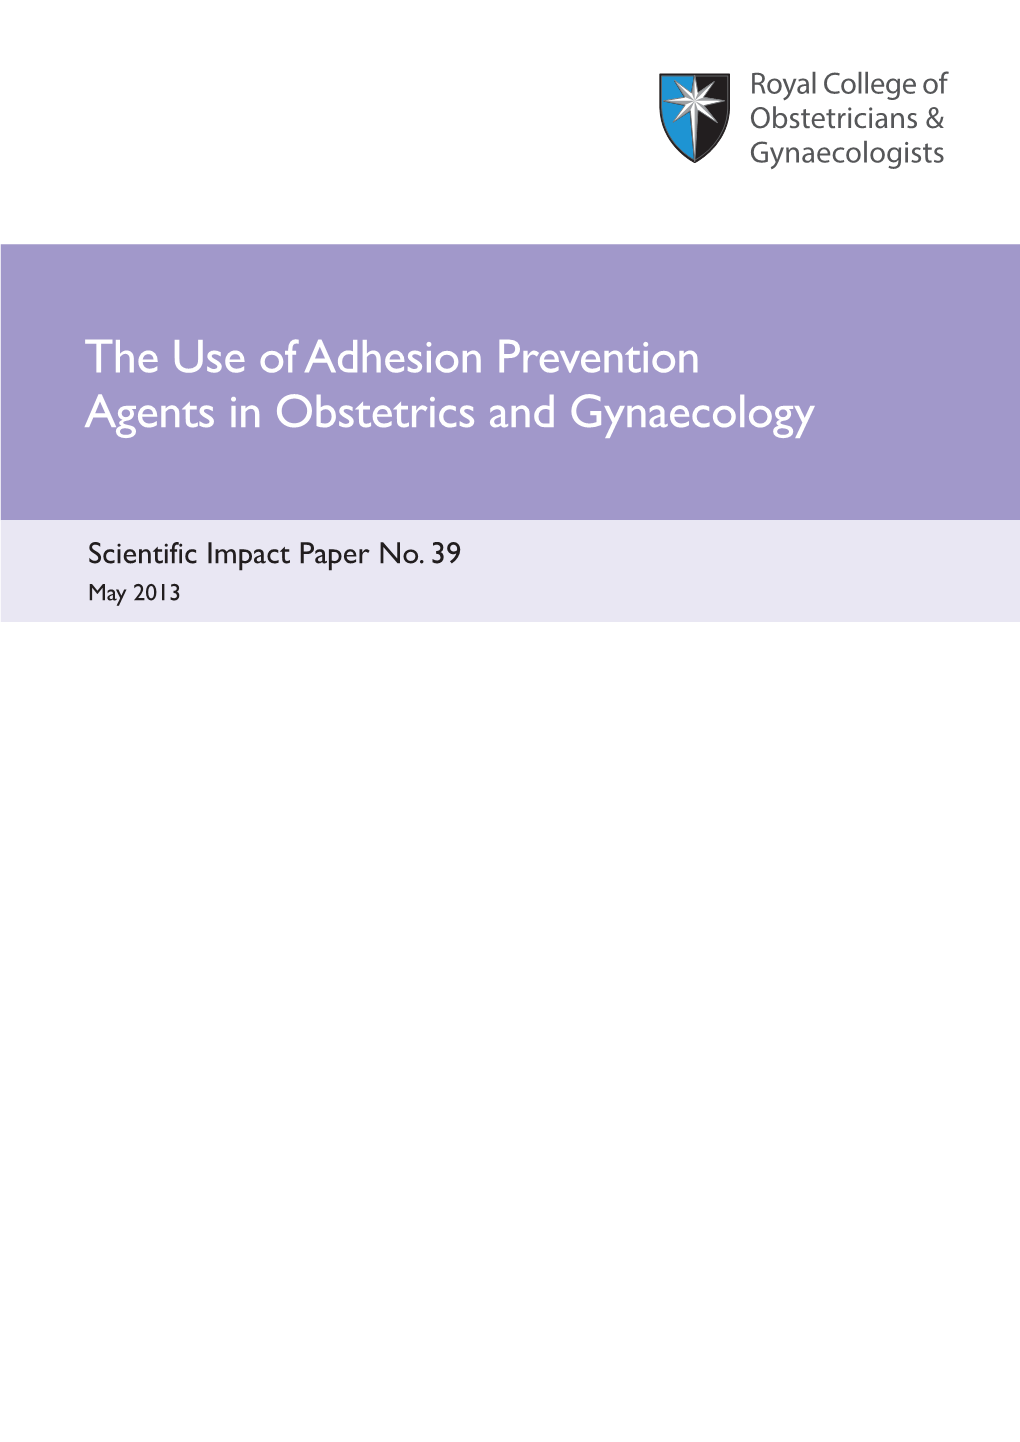 Adhesion Prevention Agents in Obstetrics and Gynaecology